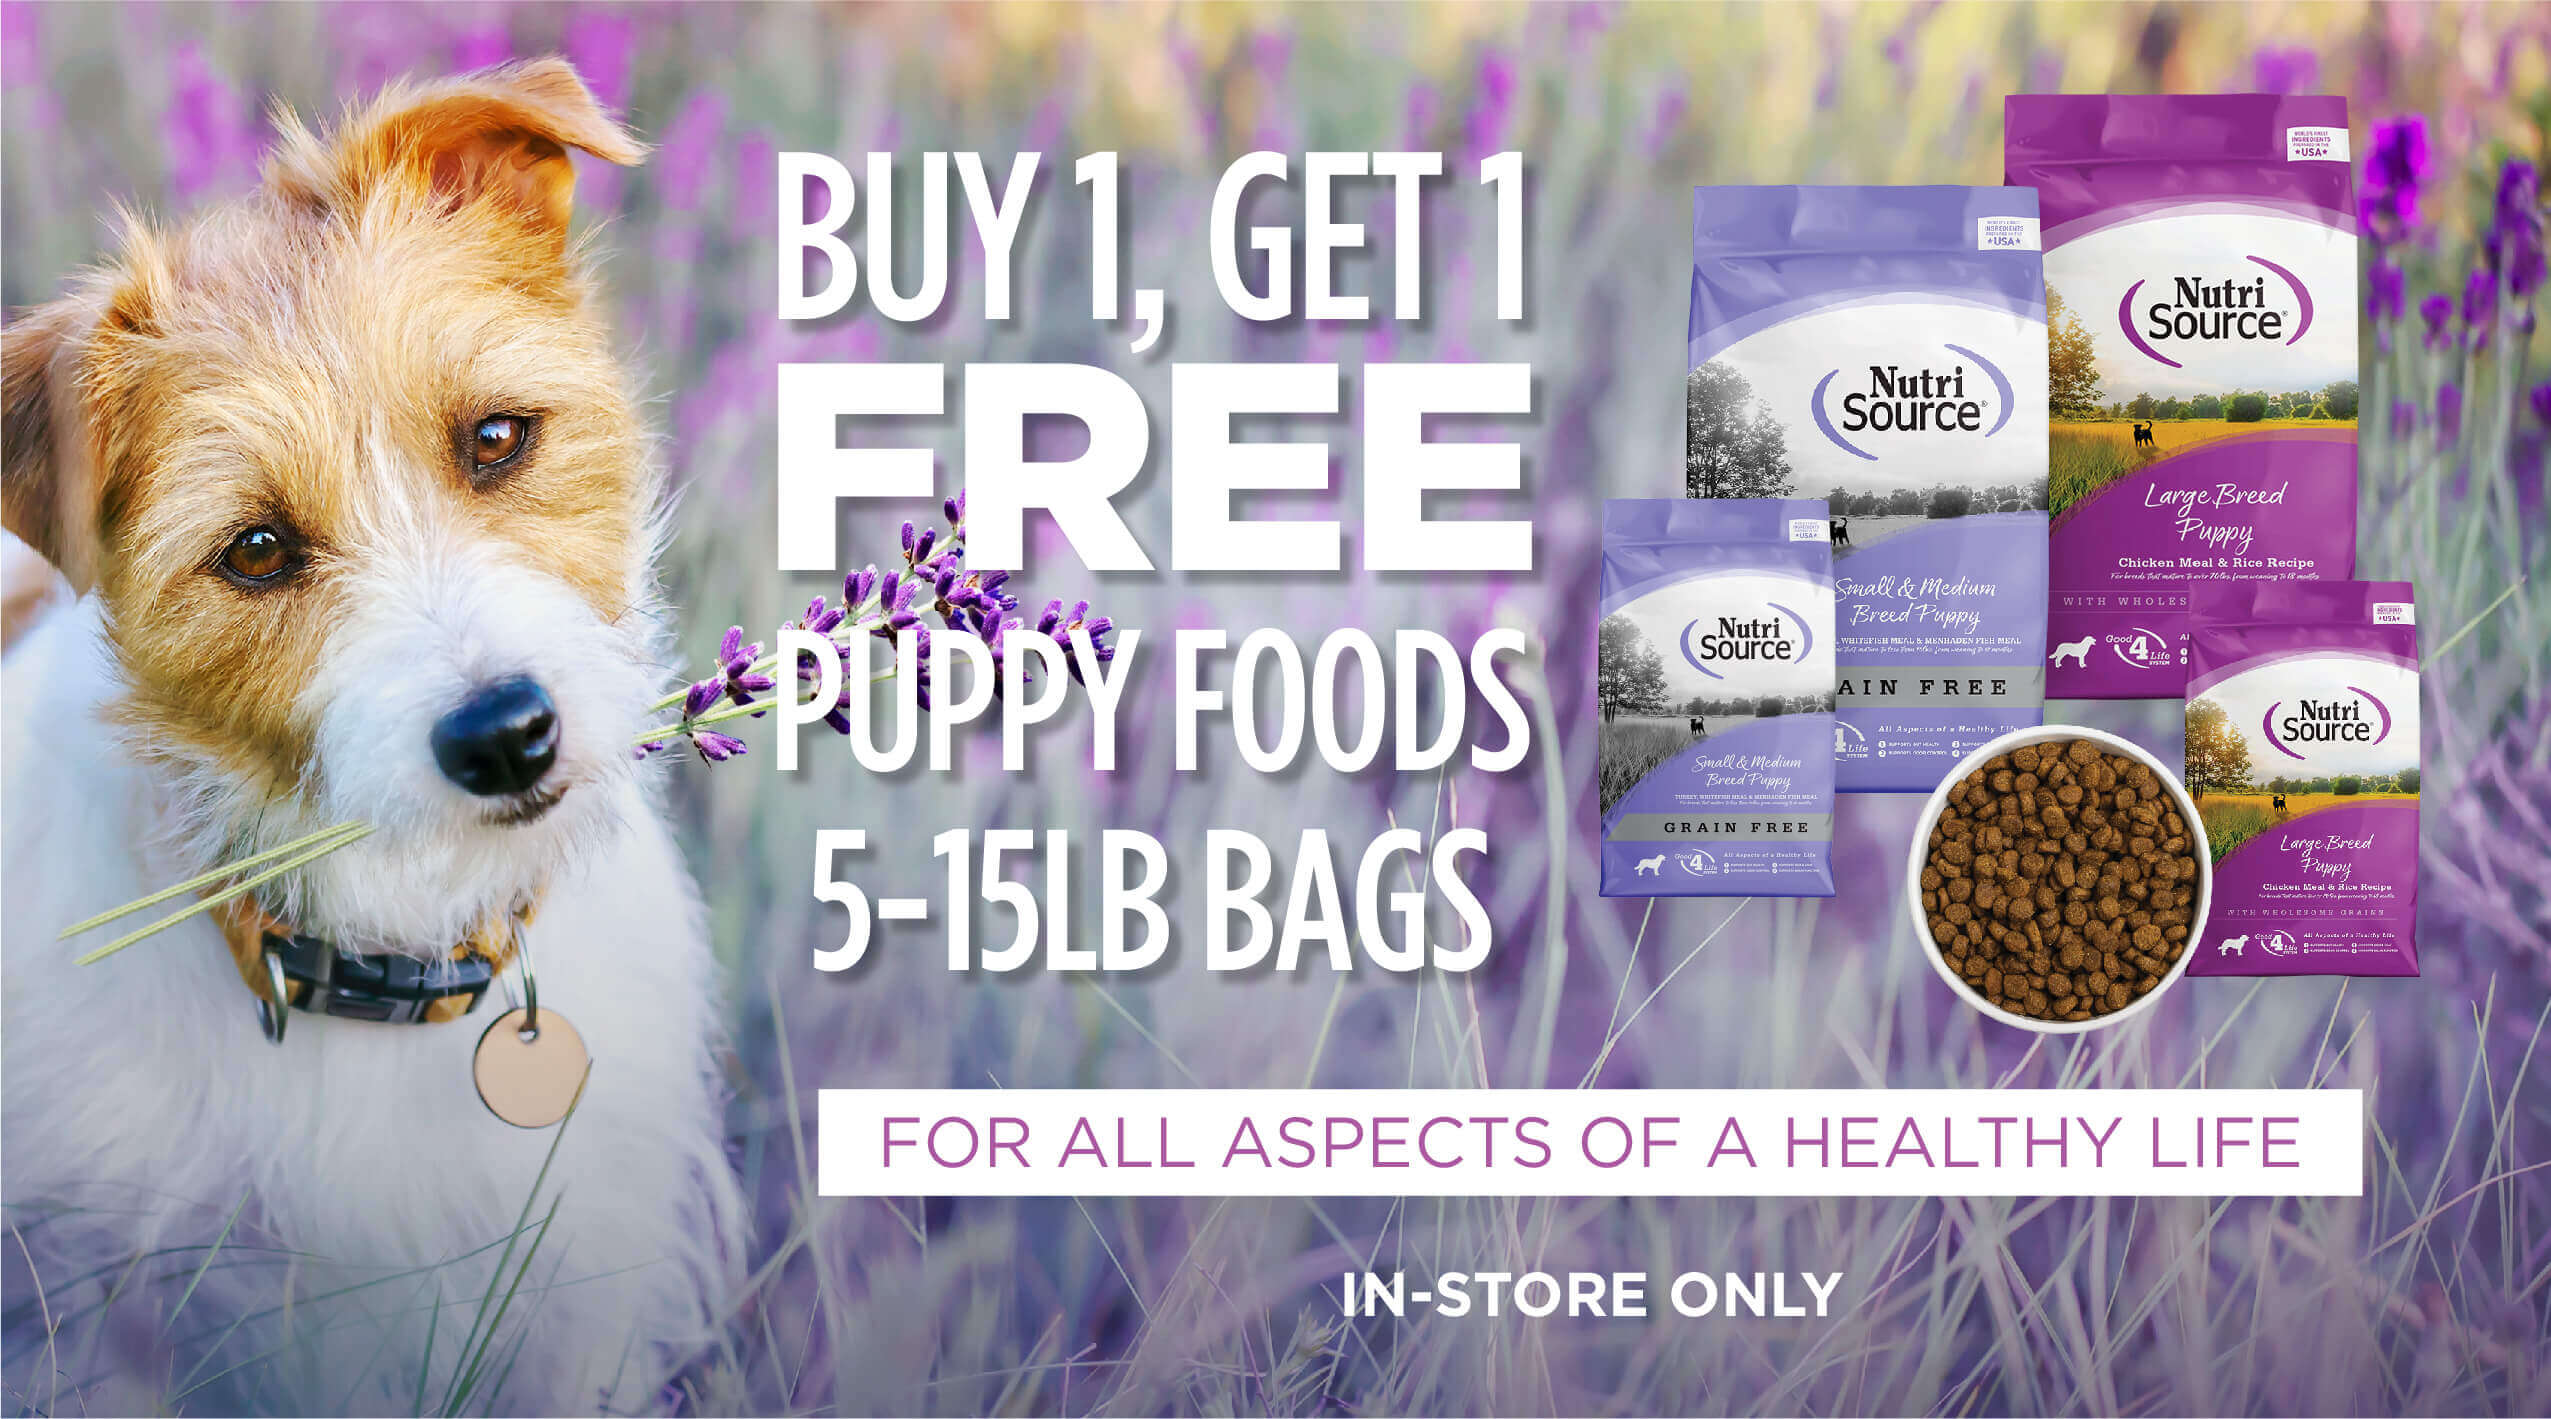 Buy 1, Get 1 FREE NutriSource Puppy Foods 5-15LB Bags - In Store Only